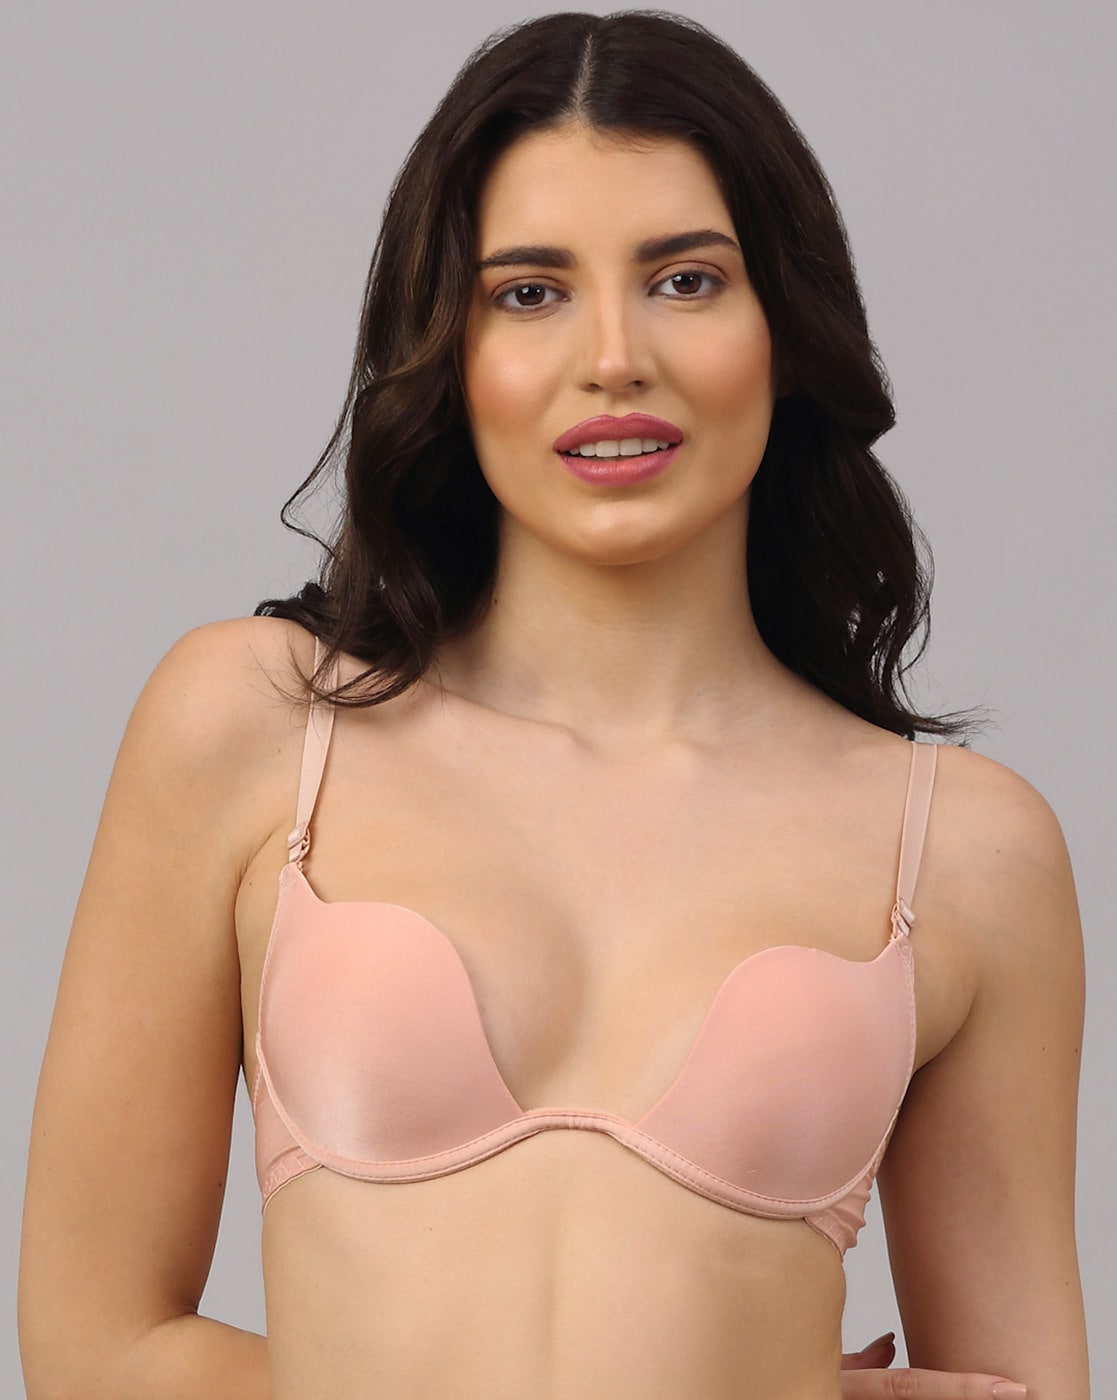  Today Deals Prime Backless Bras for Women Push up Bra Women's  Minimizer Bras Push up Bra  outlets Store Clearance Beige S : Sports  & Outdoors